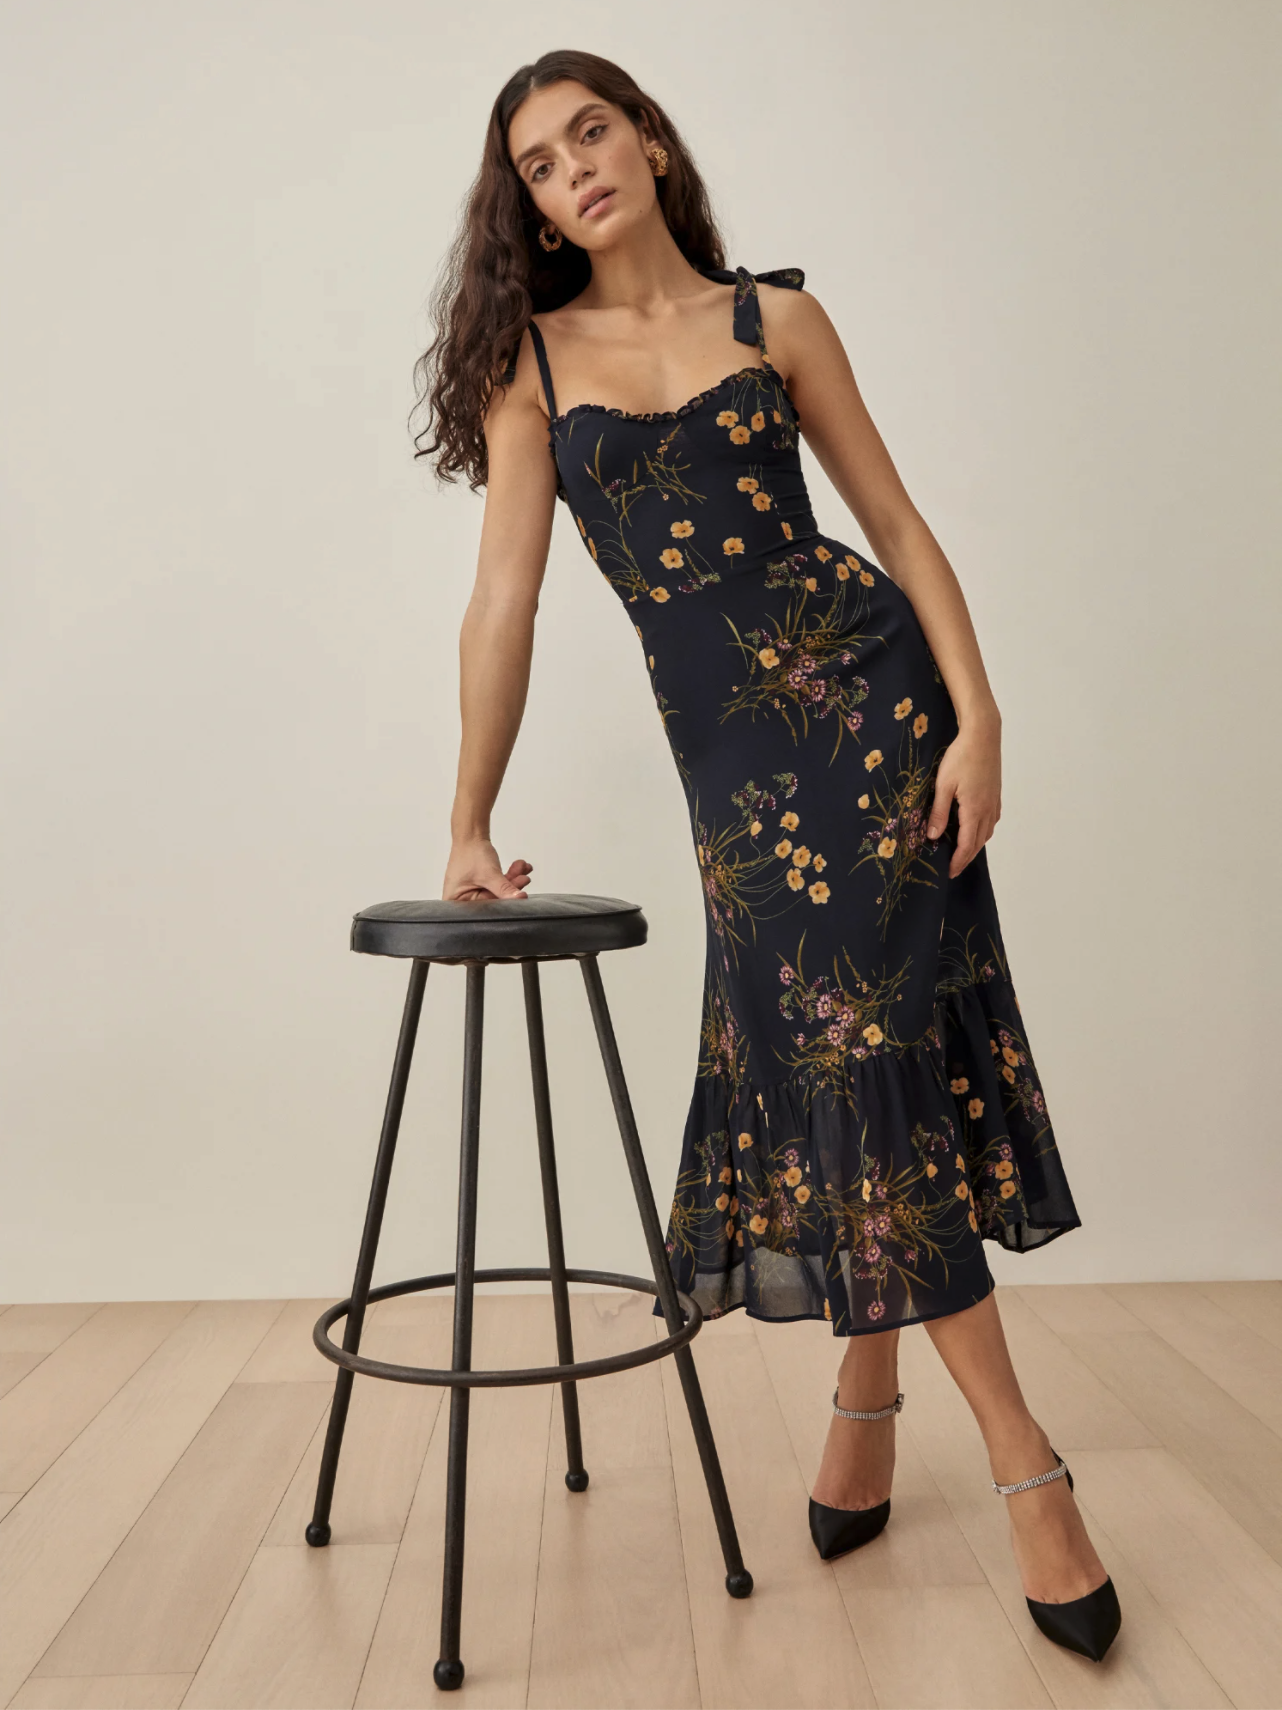 a model wearing a black dress with yellow and purple floral scattered about